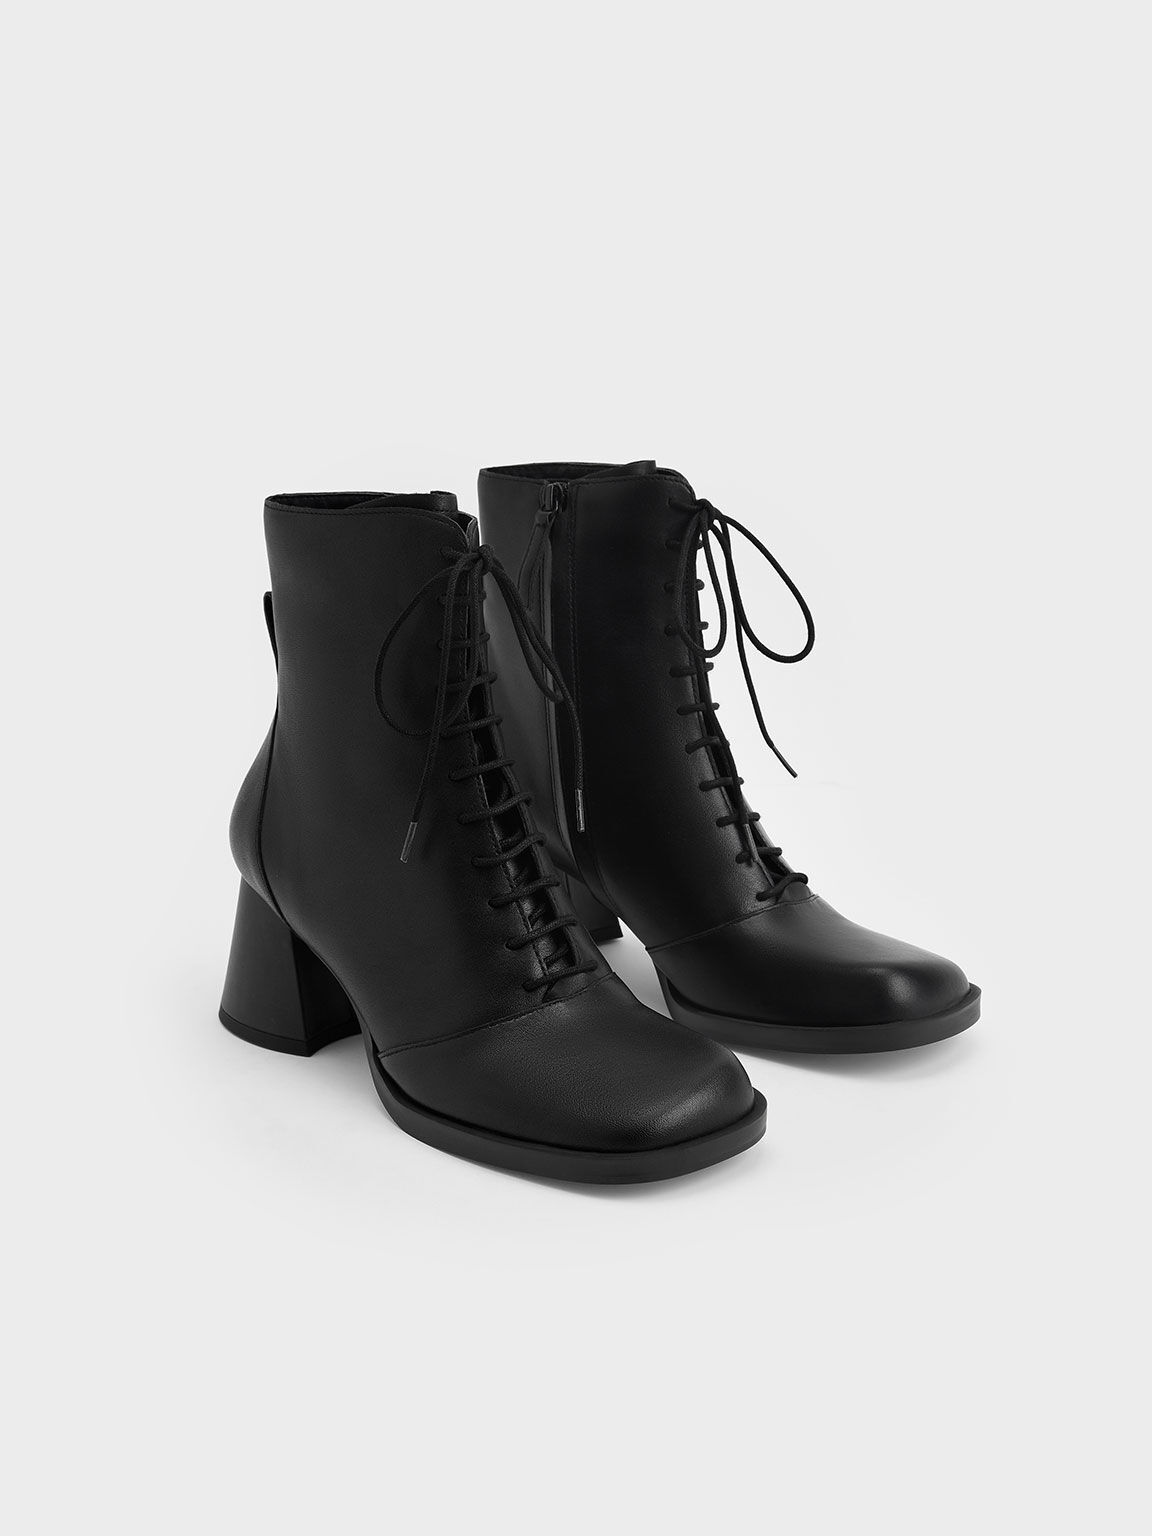 Leather Lace-Up Ankle Boots, Black, hi-res